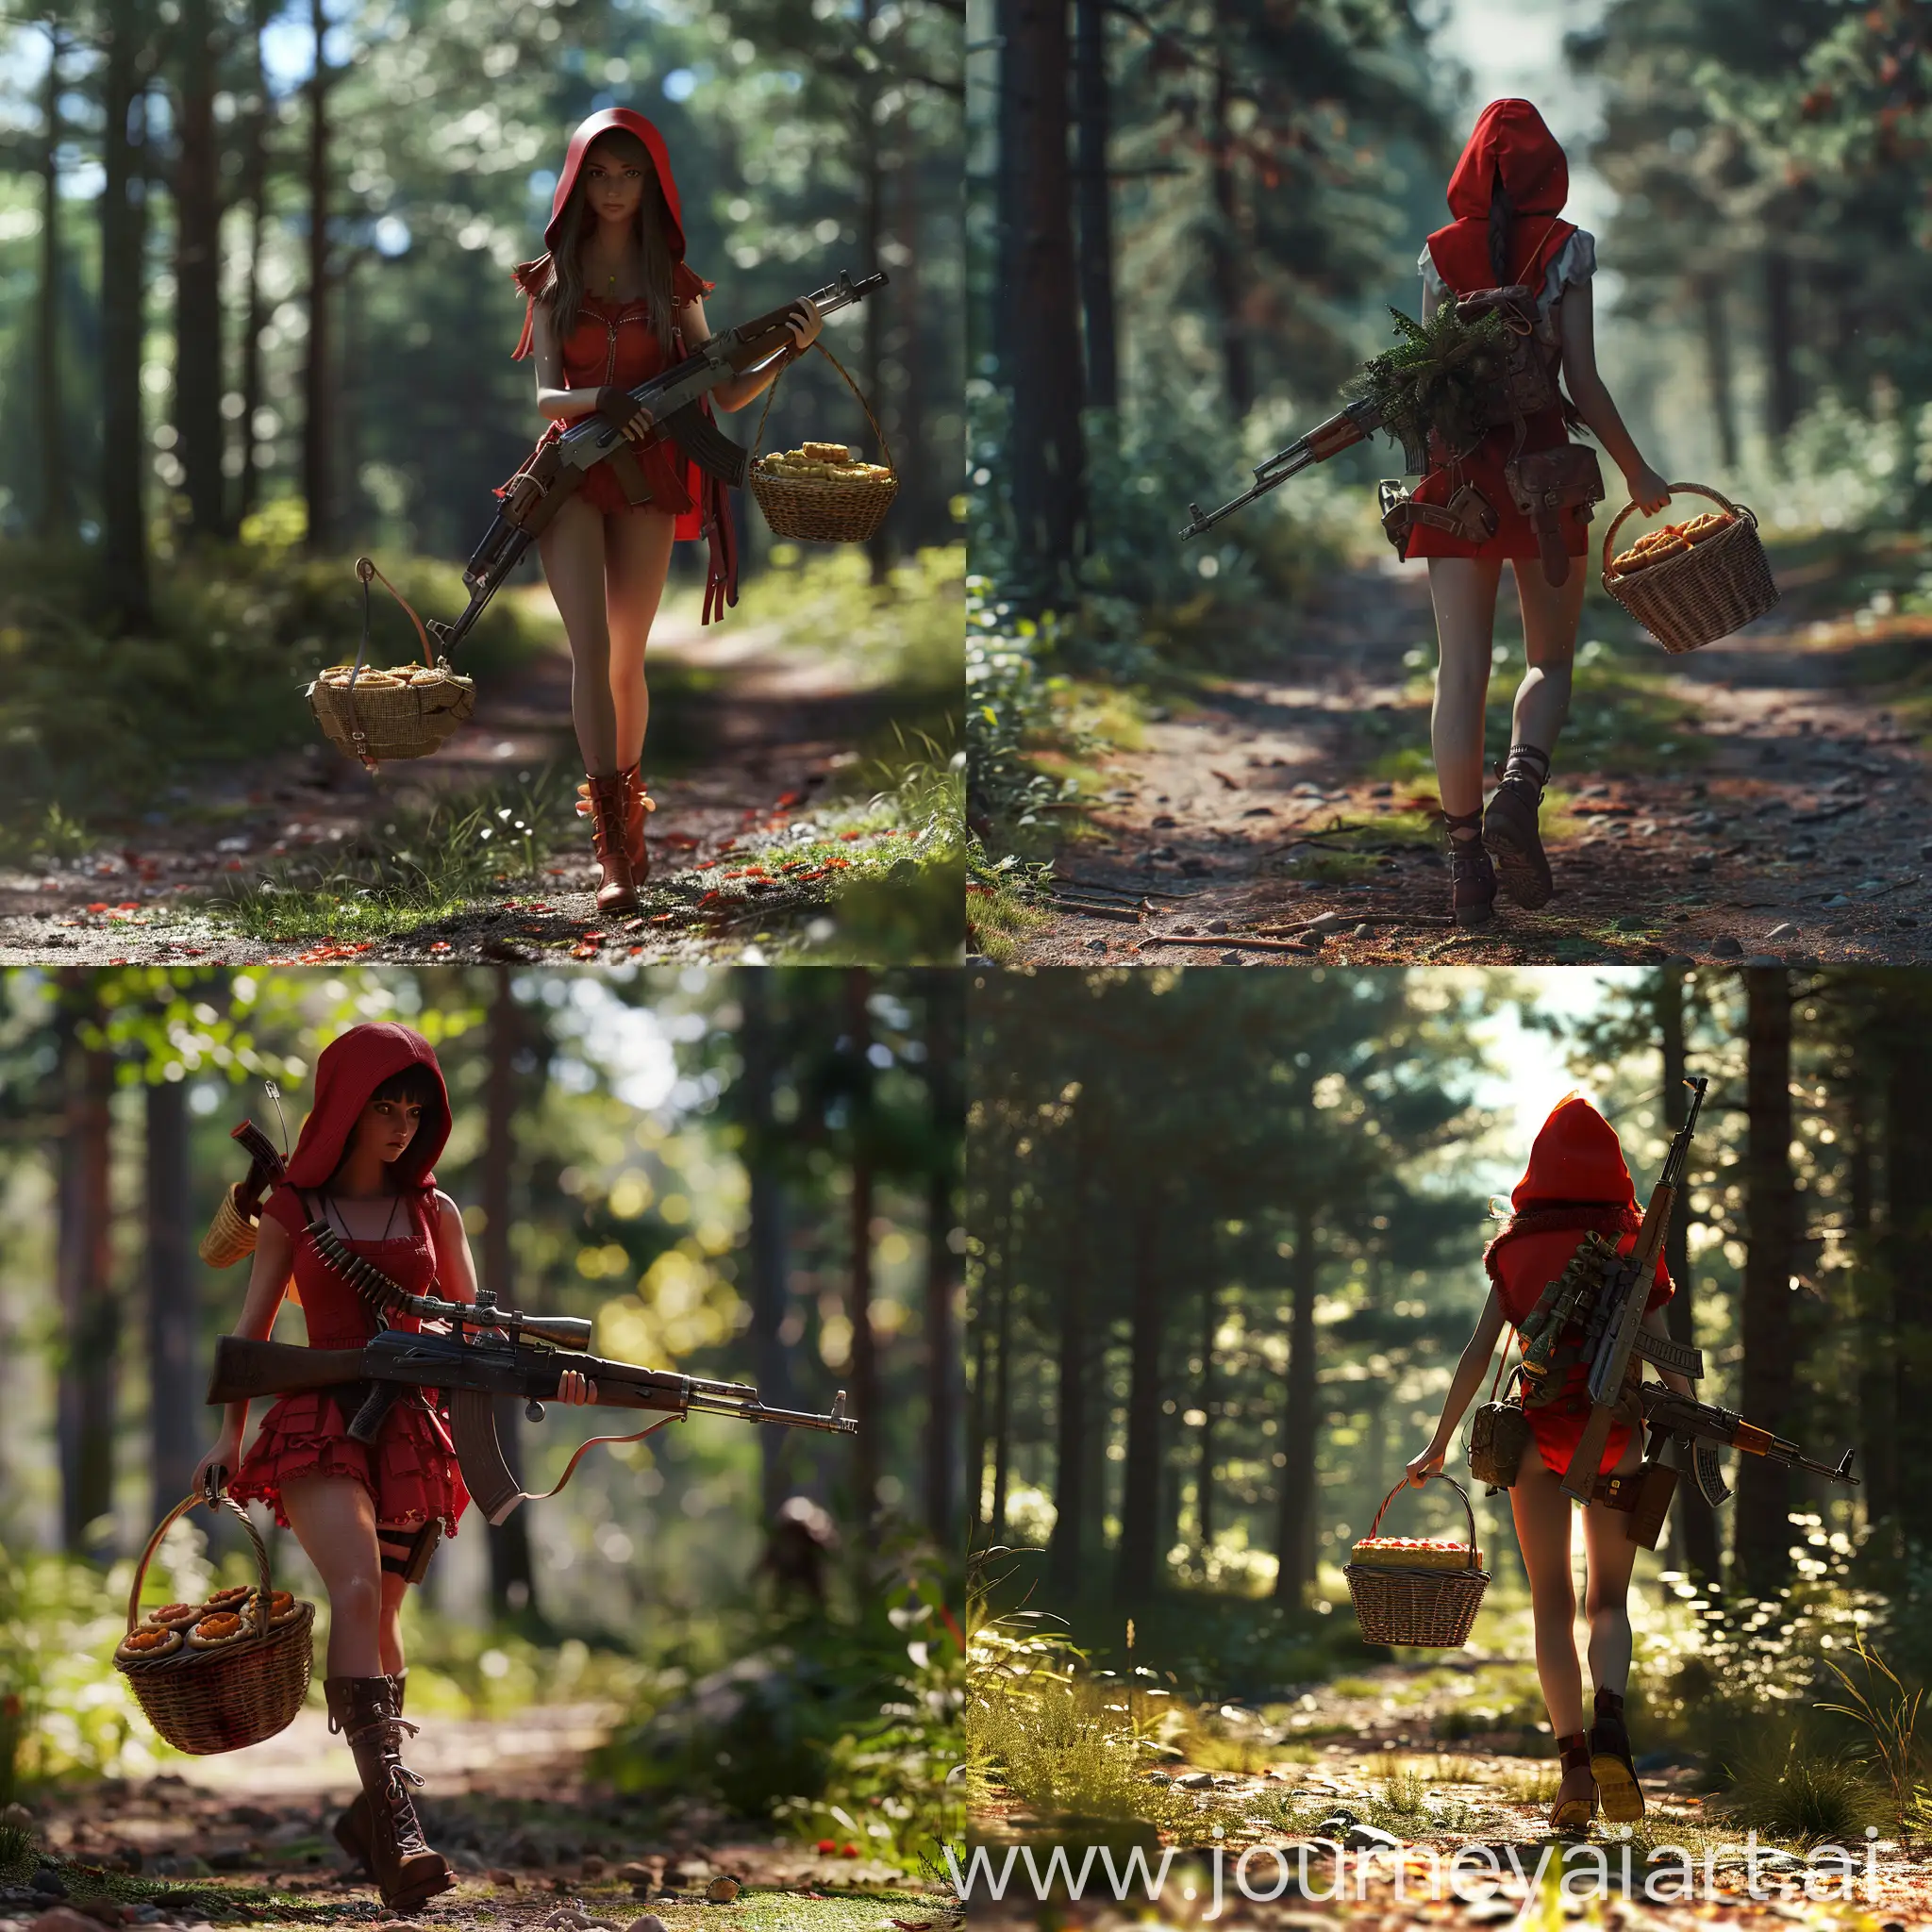 based on the fairy tale "Little Red Riding Hood", a beautiful girl in a red riding hood walks along a forest path in France, a basket of pies in one hand, a Kalashnikov assault rifle in the other, depth of field, sideways, bright saturated colors, extremely realistic images, shadows, high detail, Unreal Engine graphics, realism, 8K Ultra HD